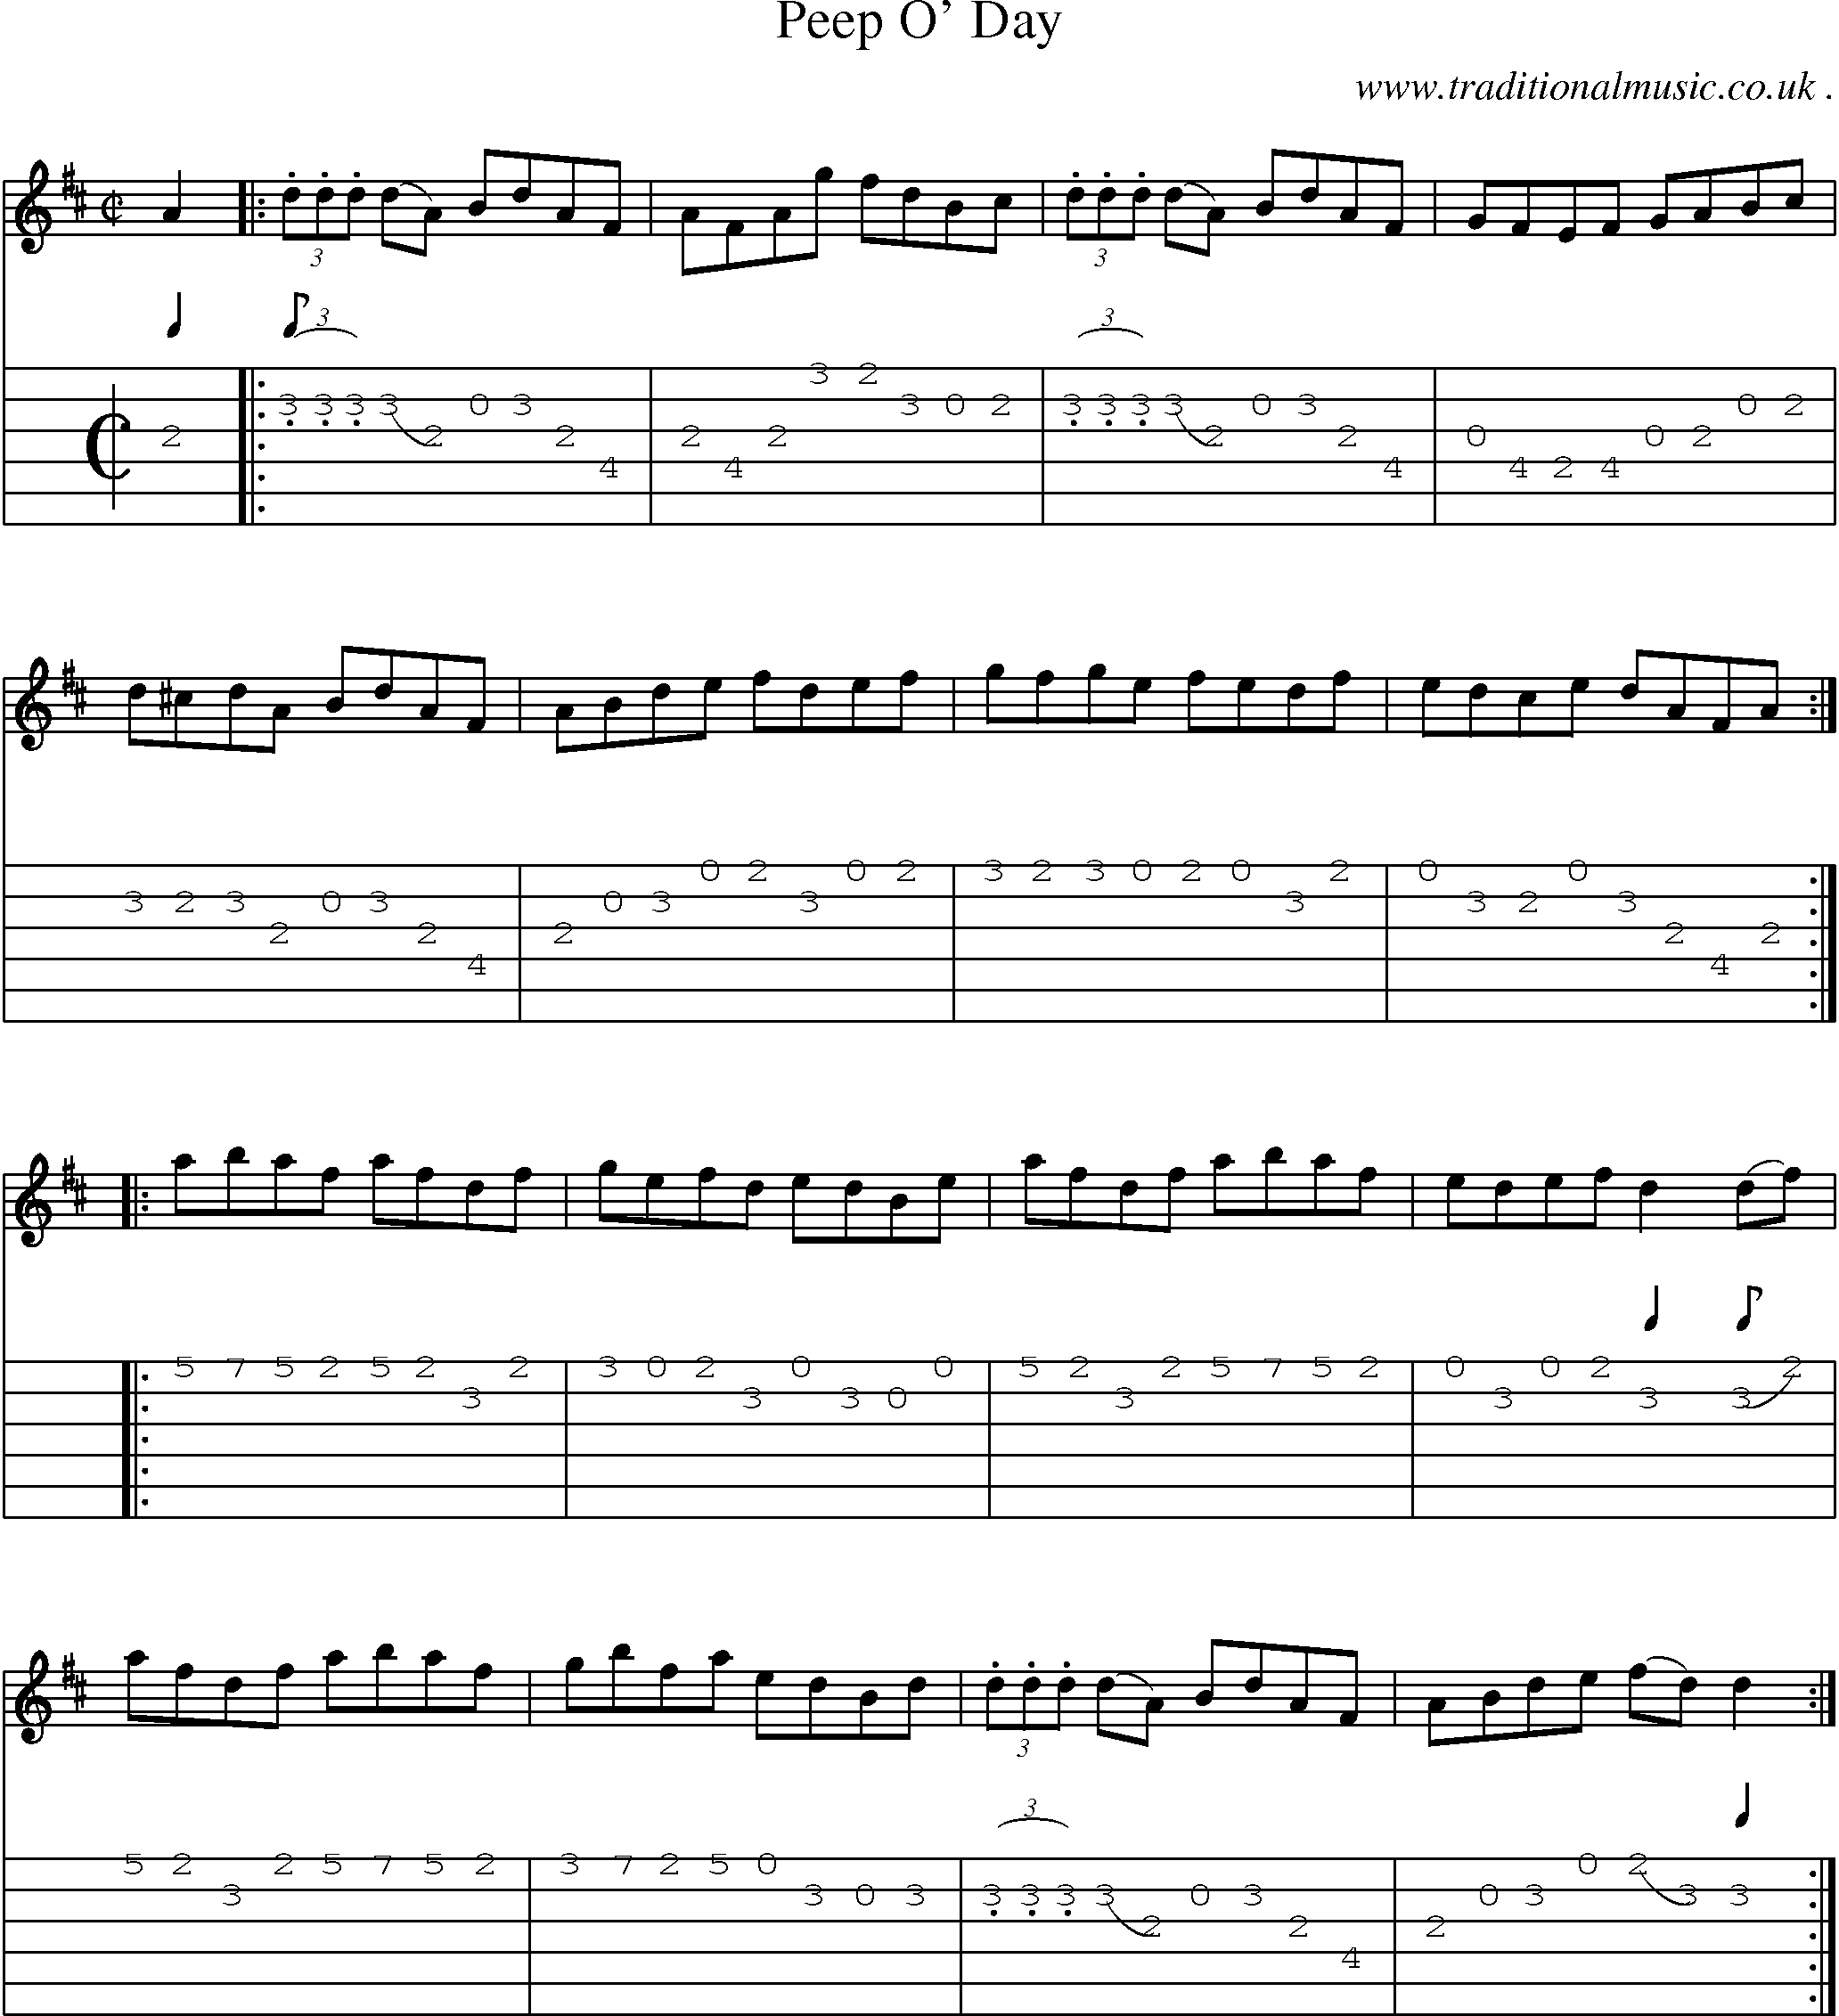 Sheet-Music and Guitar Tabs for Peep O Day